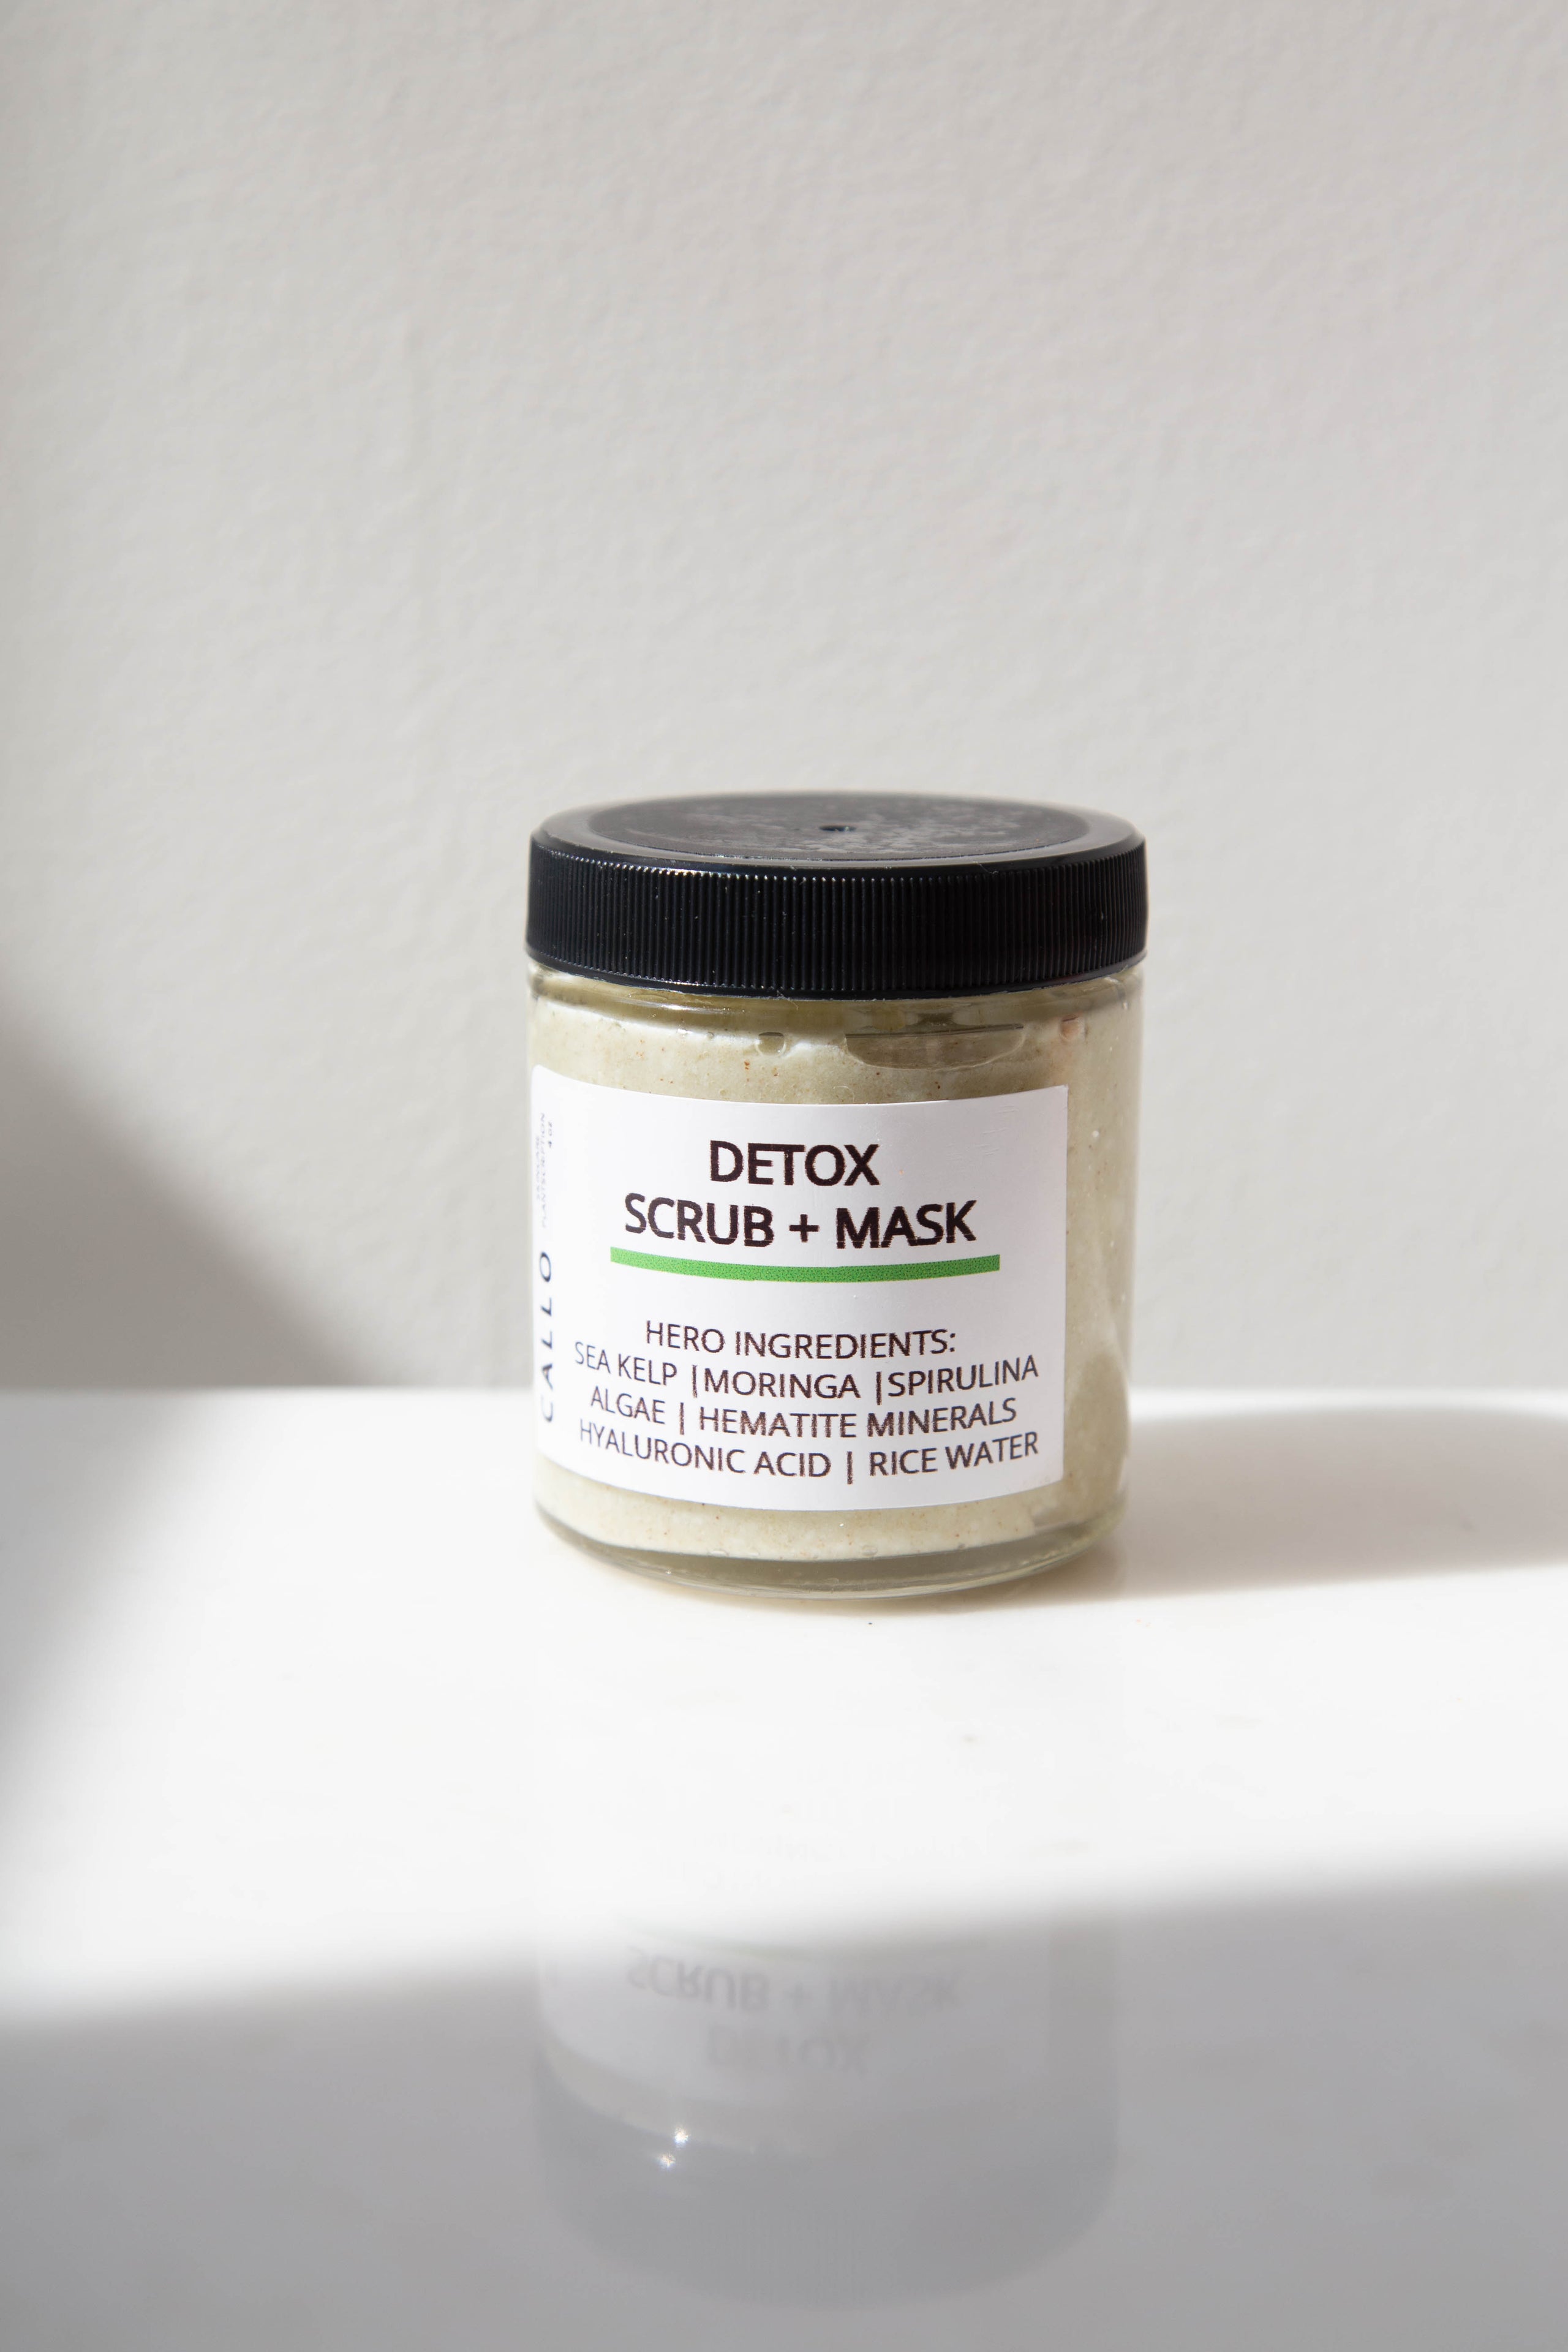 voorbeeld verzonden lexicon Detox Mask + Scrub | C A L L O Enhance your beauty from the inside + out  routine.